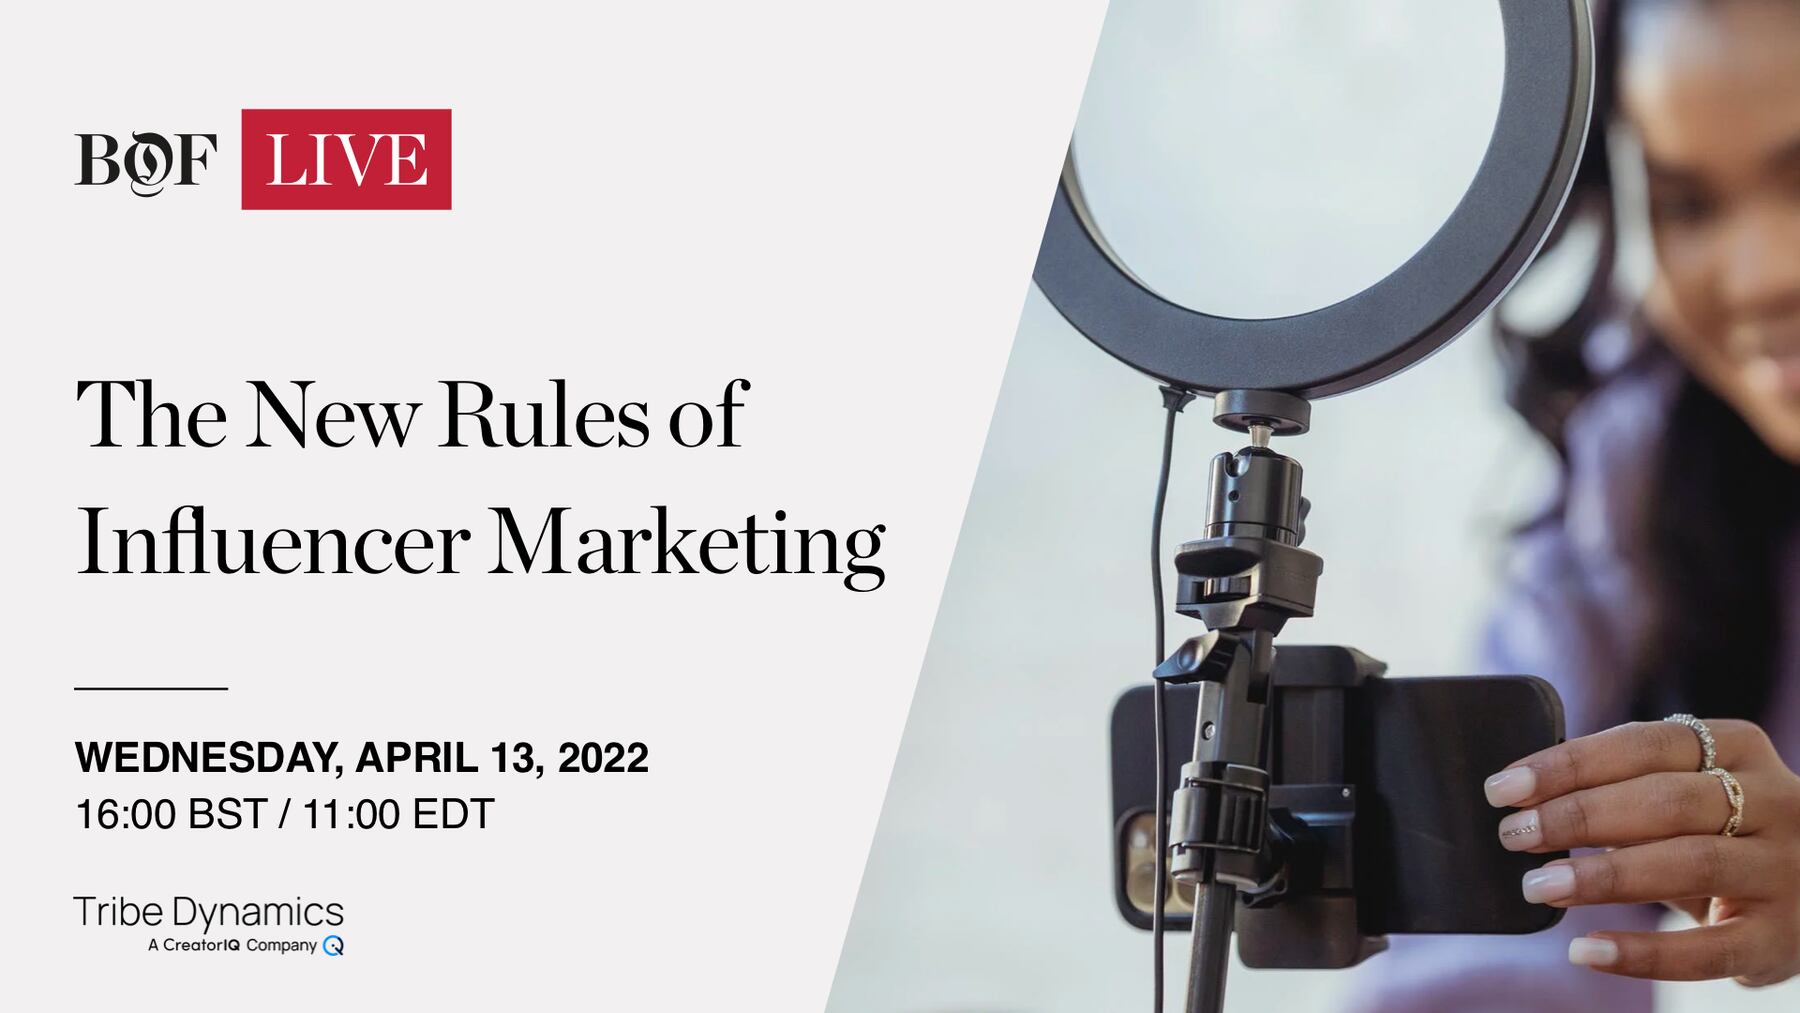 BoF LIVE: The New Rules of Influencer Marketing